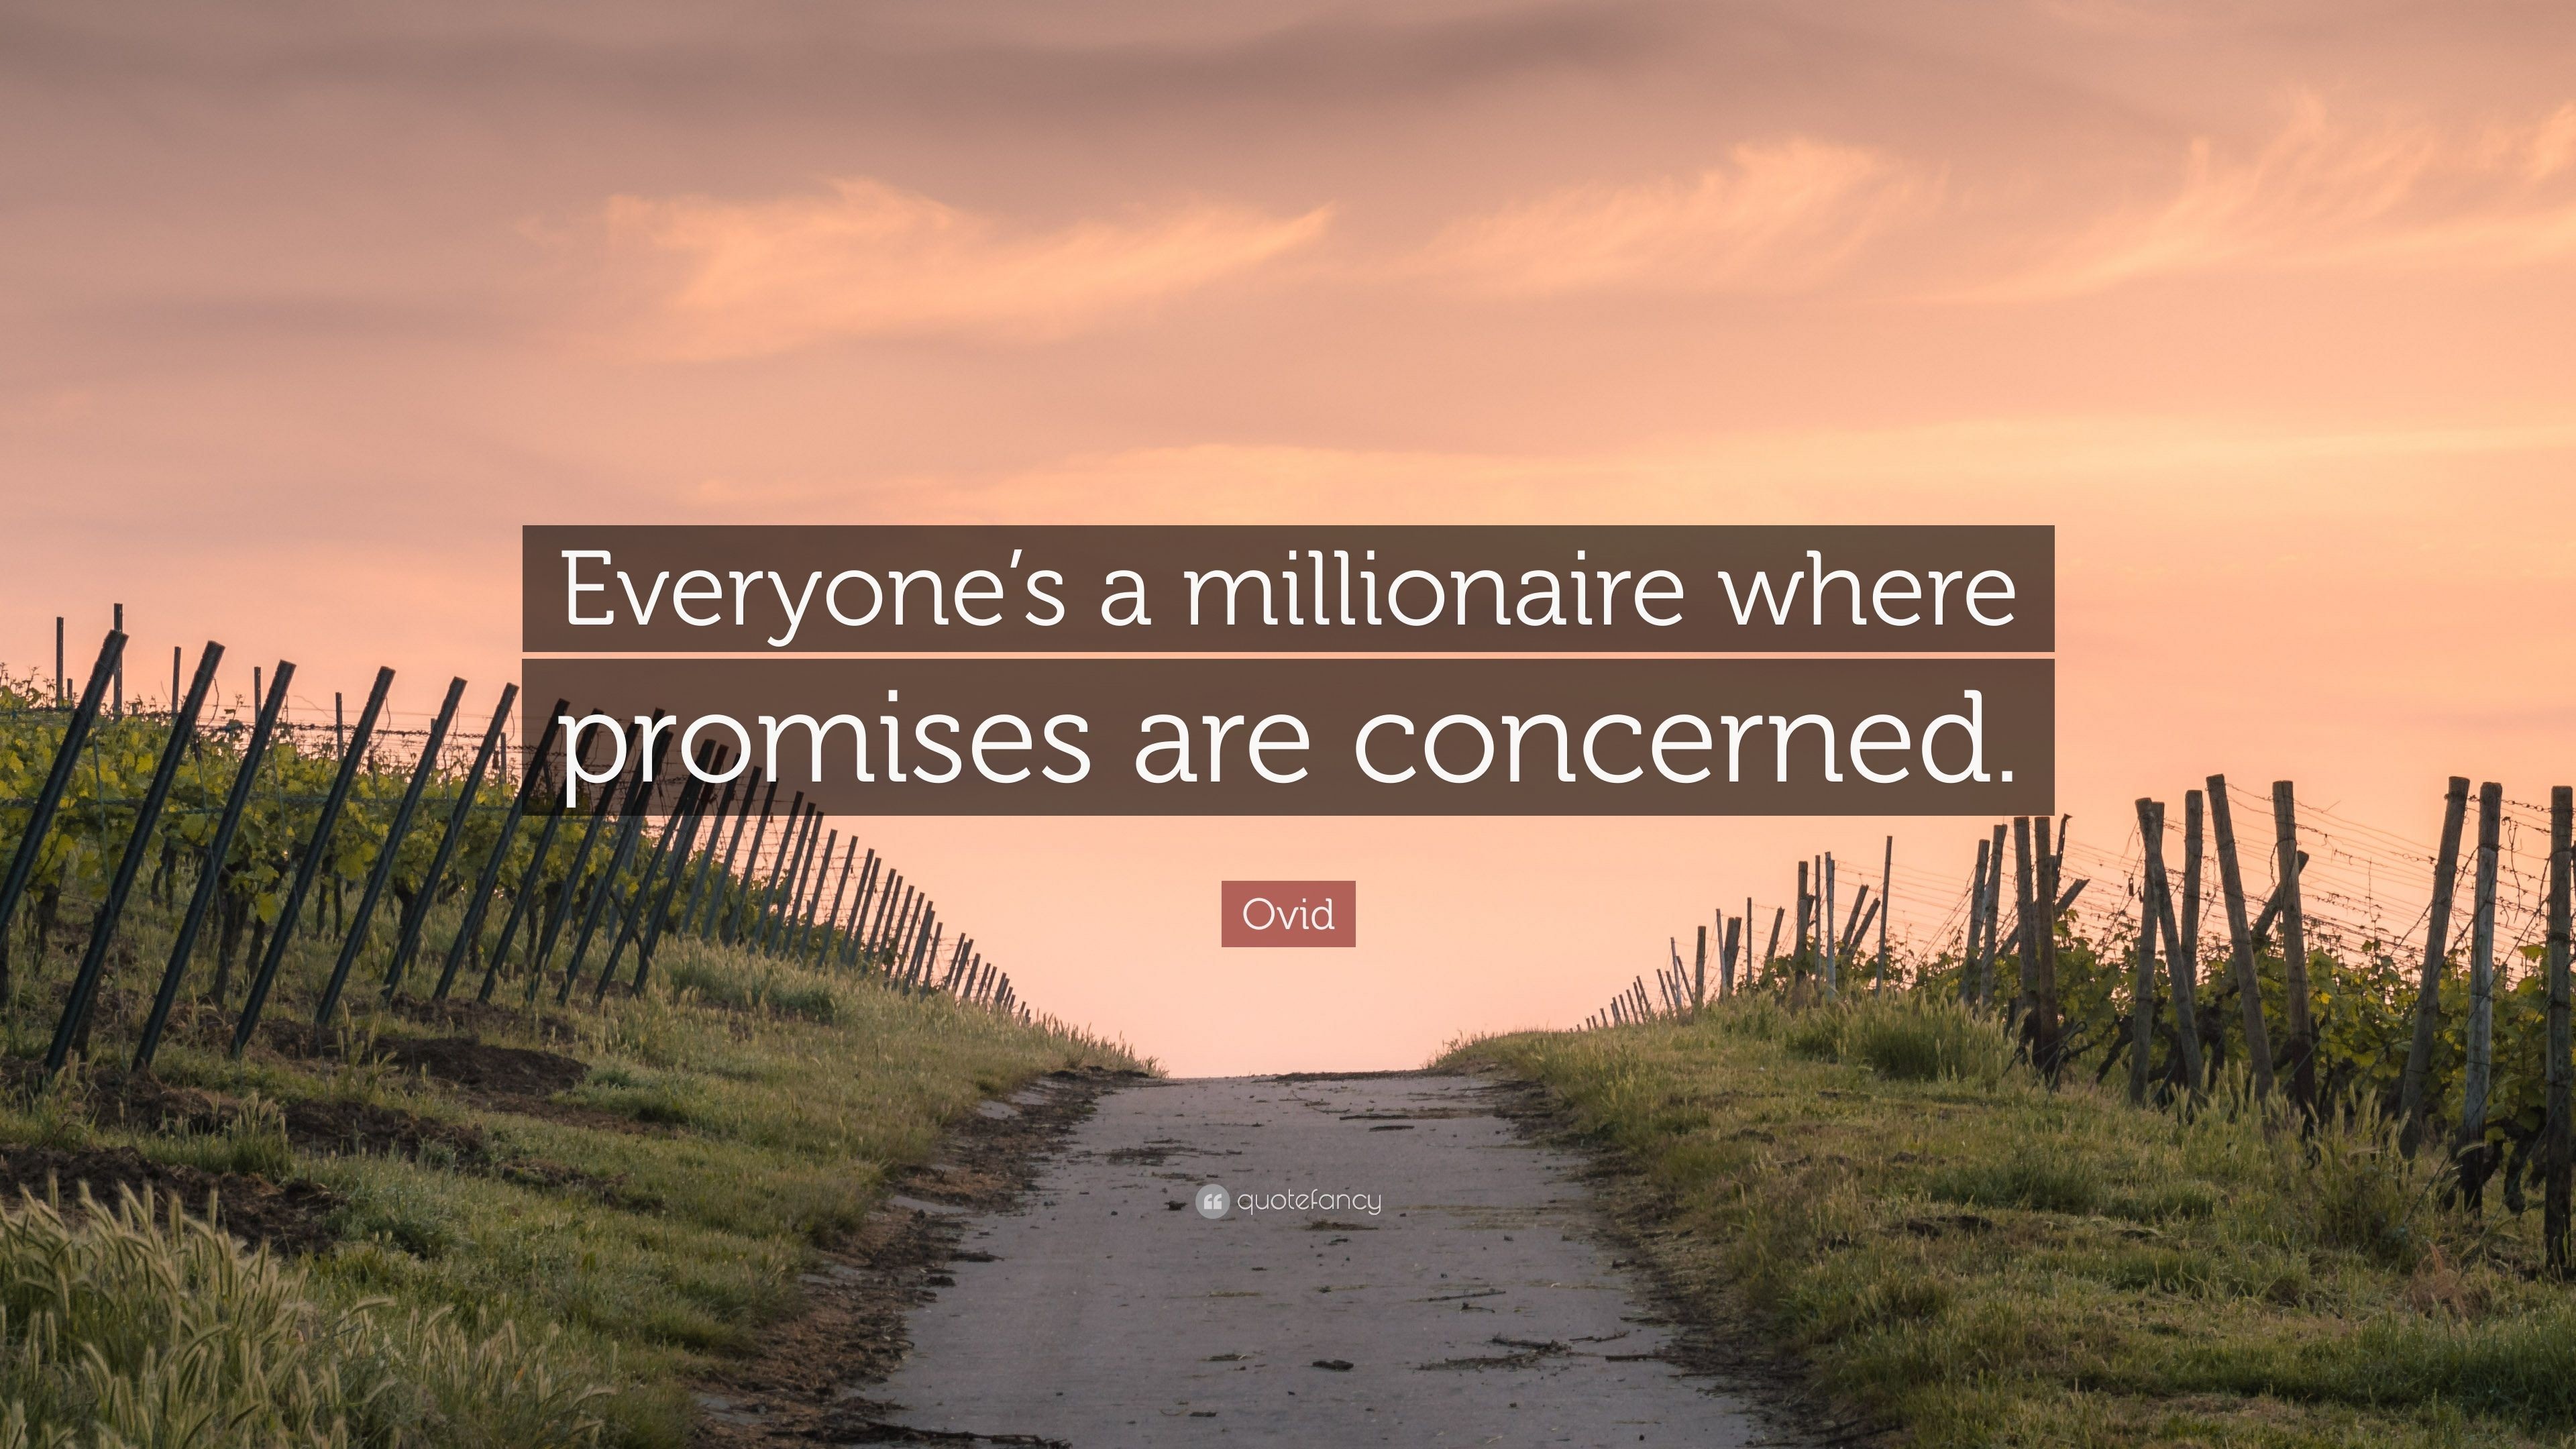 3840x2160 Ovid Quote: “Everyone's a millionaire where promises are concerned.”